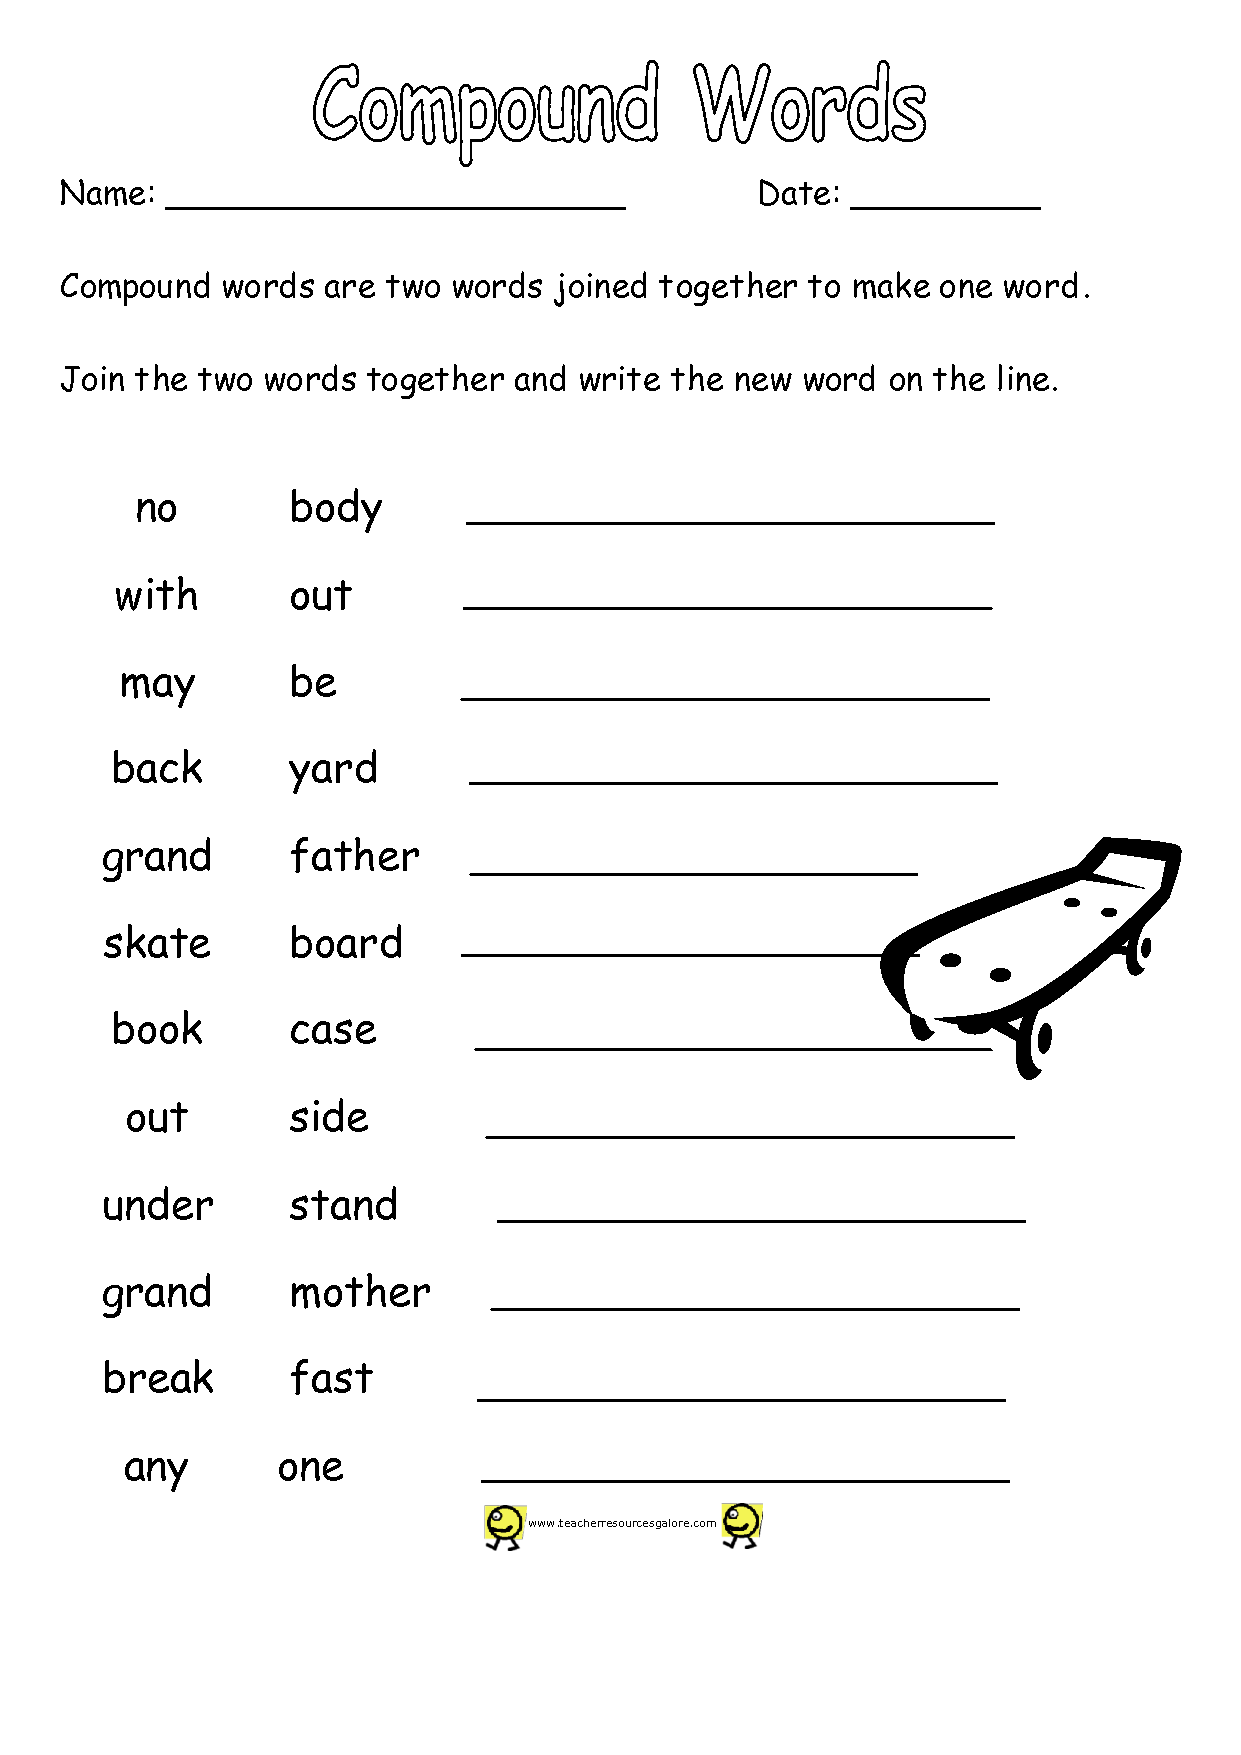 free-printable-compound-words-worksheets-printable-templates